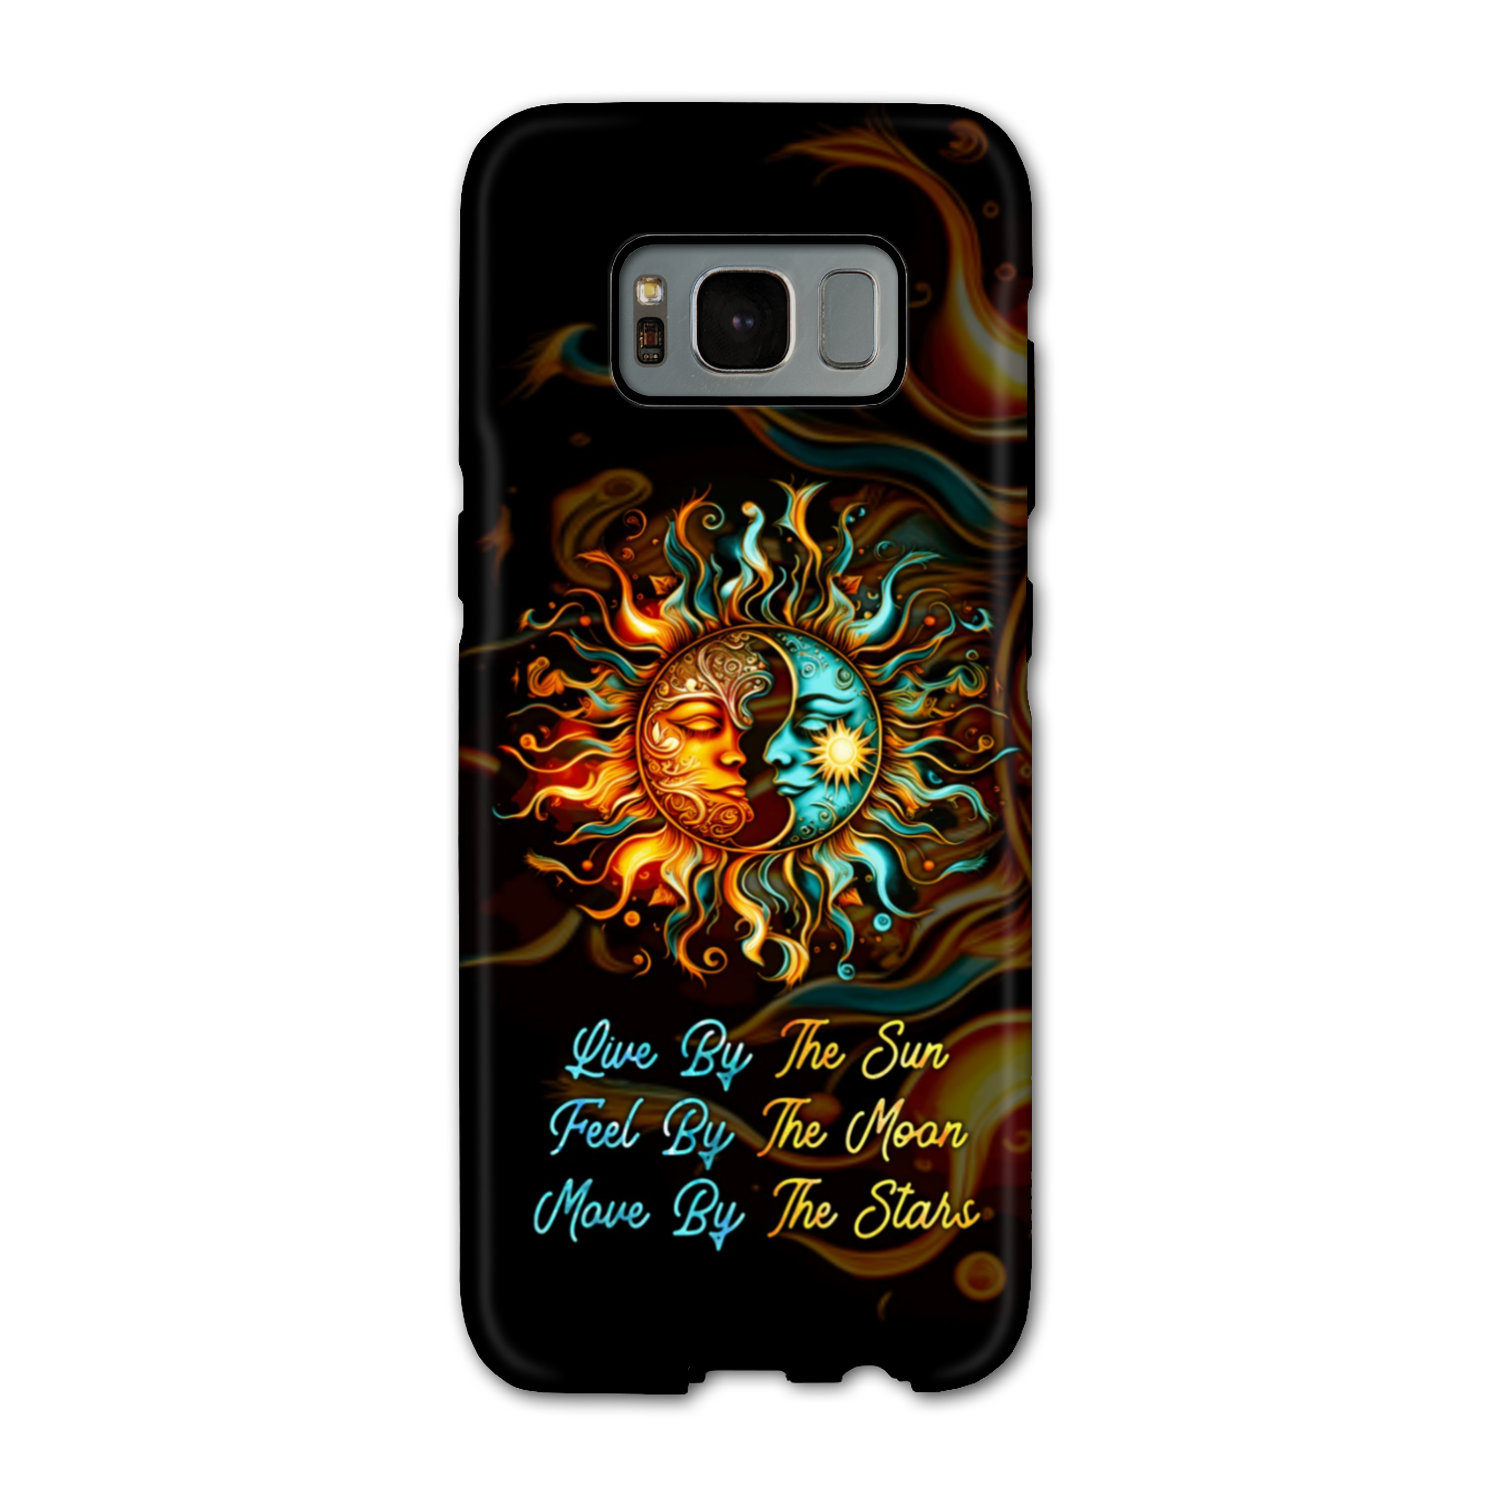 LIVE BY THE SUN PHONE CASE - TY0403232